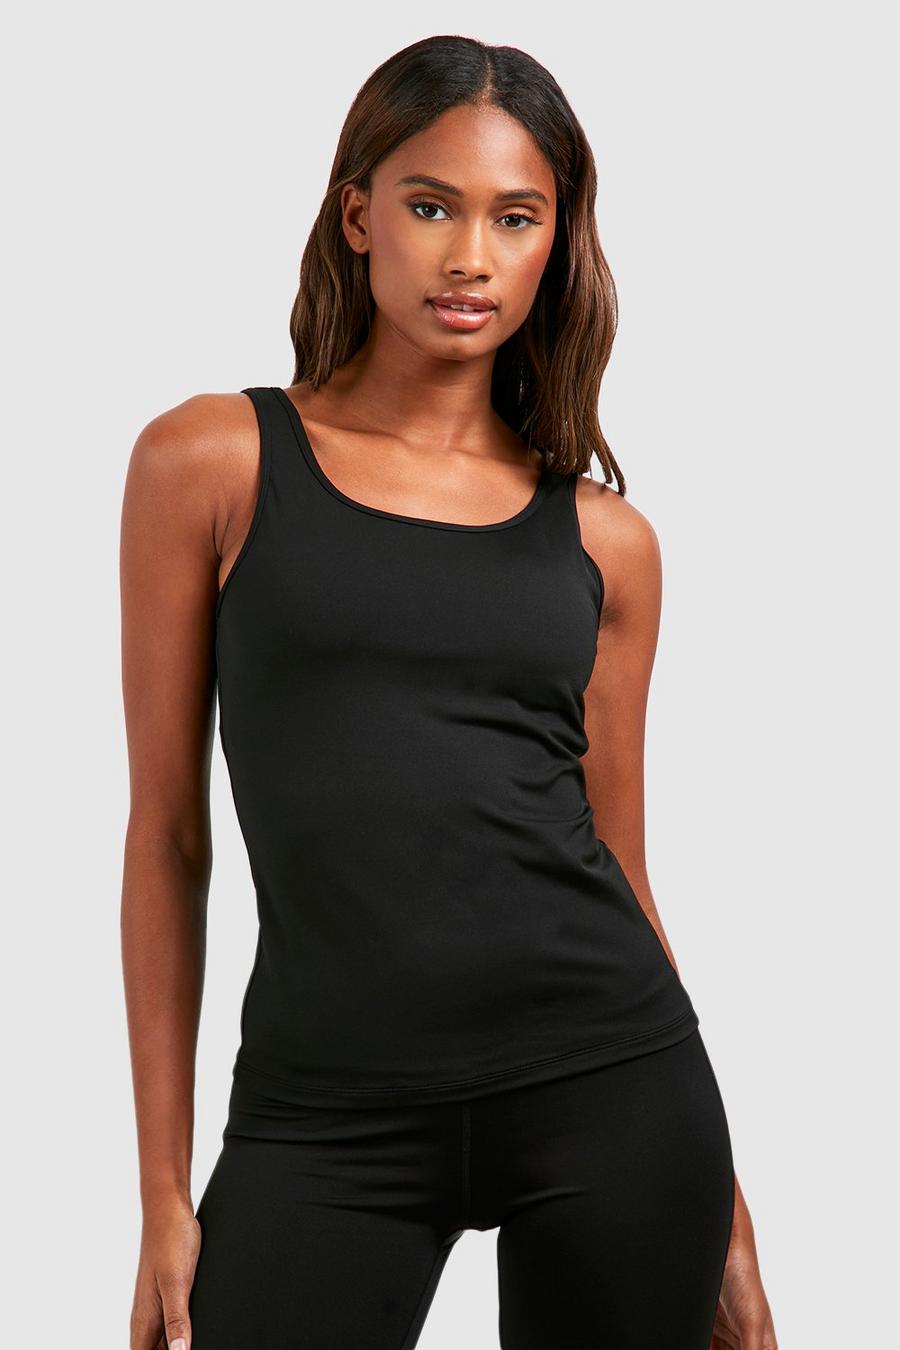 Black Dsgn Studio Supersoft Peached Sculpt Padded Tank Top Top